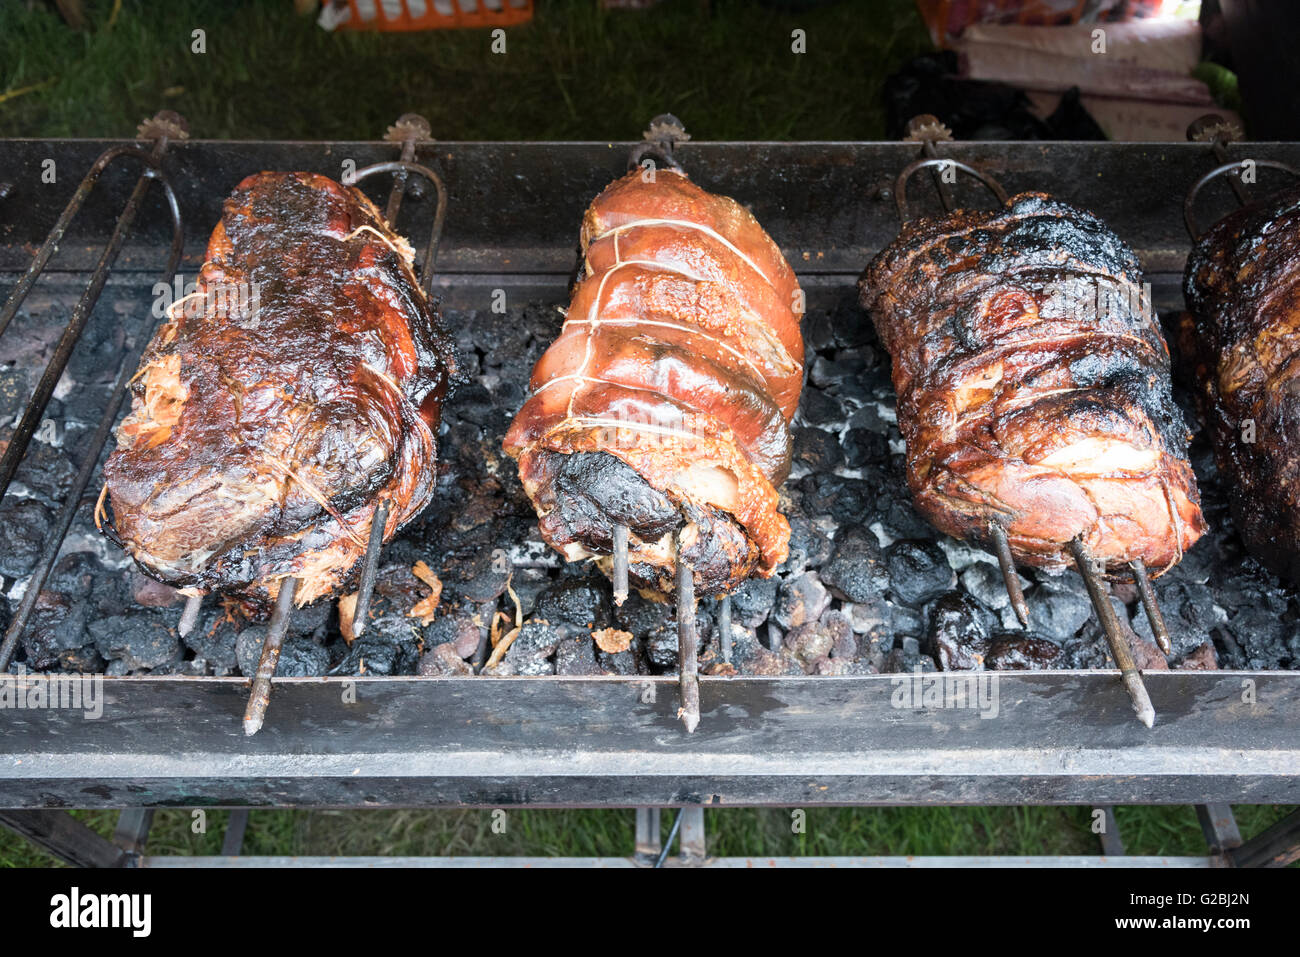 Joints of pork roasting on a spit over charcoal Stock Photo